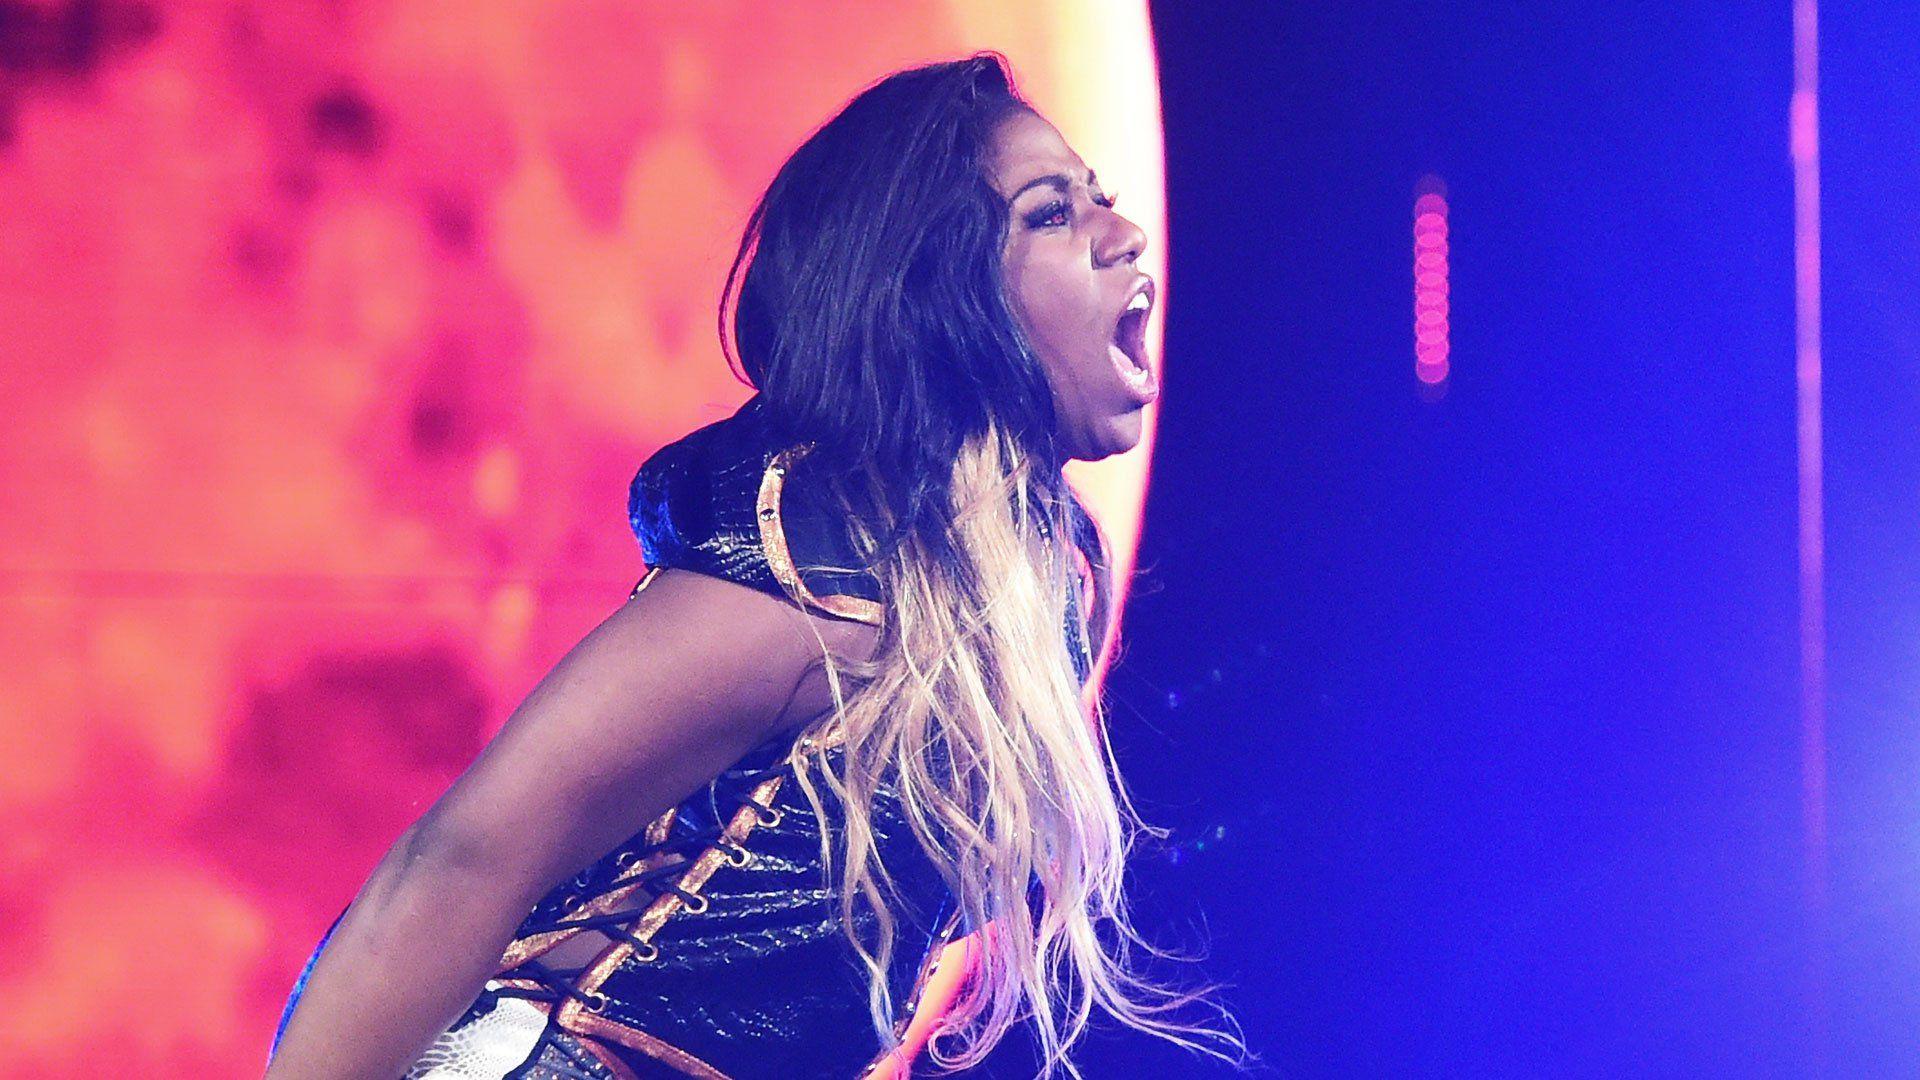 WWE Network: Ember Moon's entrance: NXT TakeOver: Brooklyn II